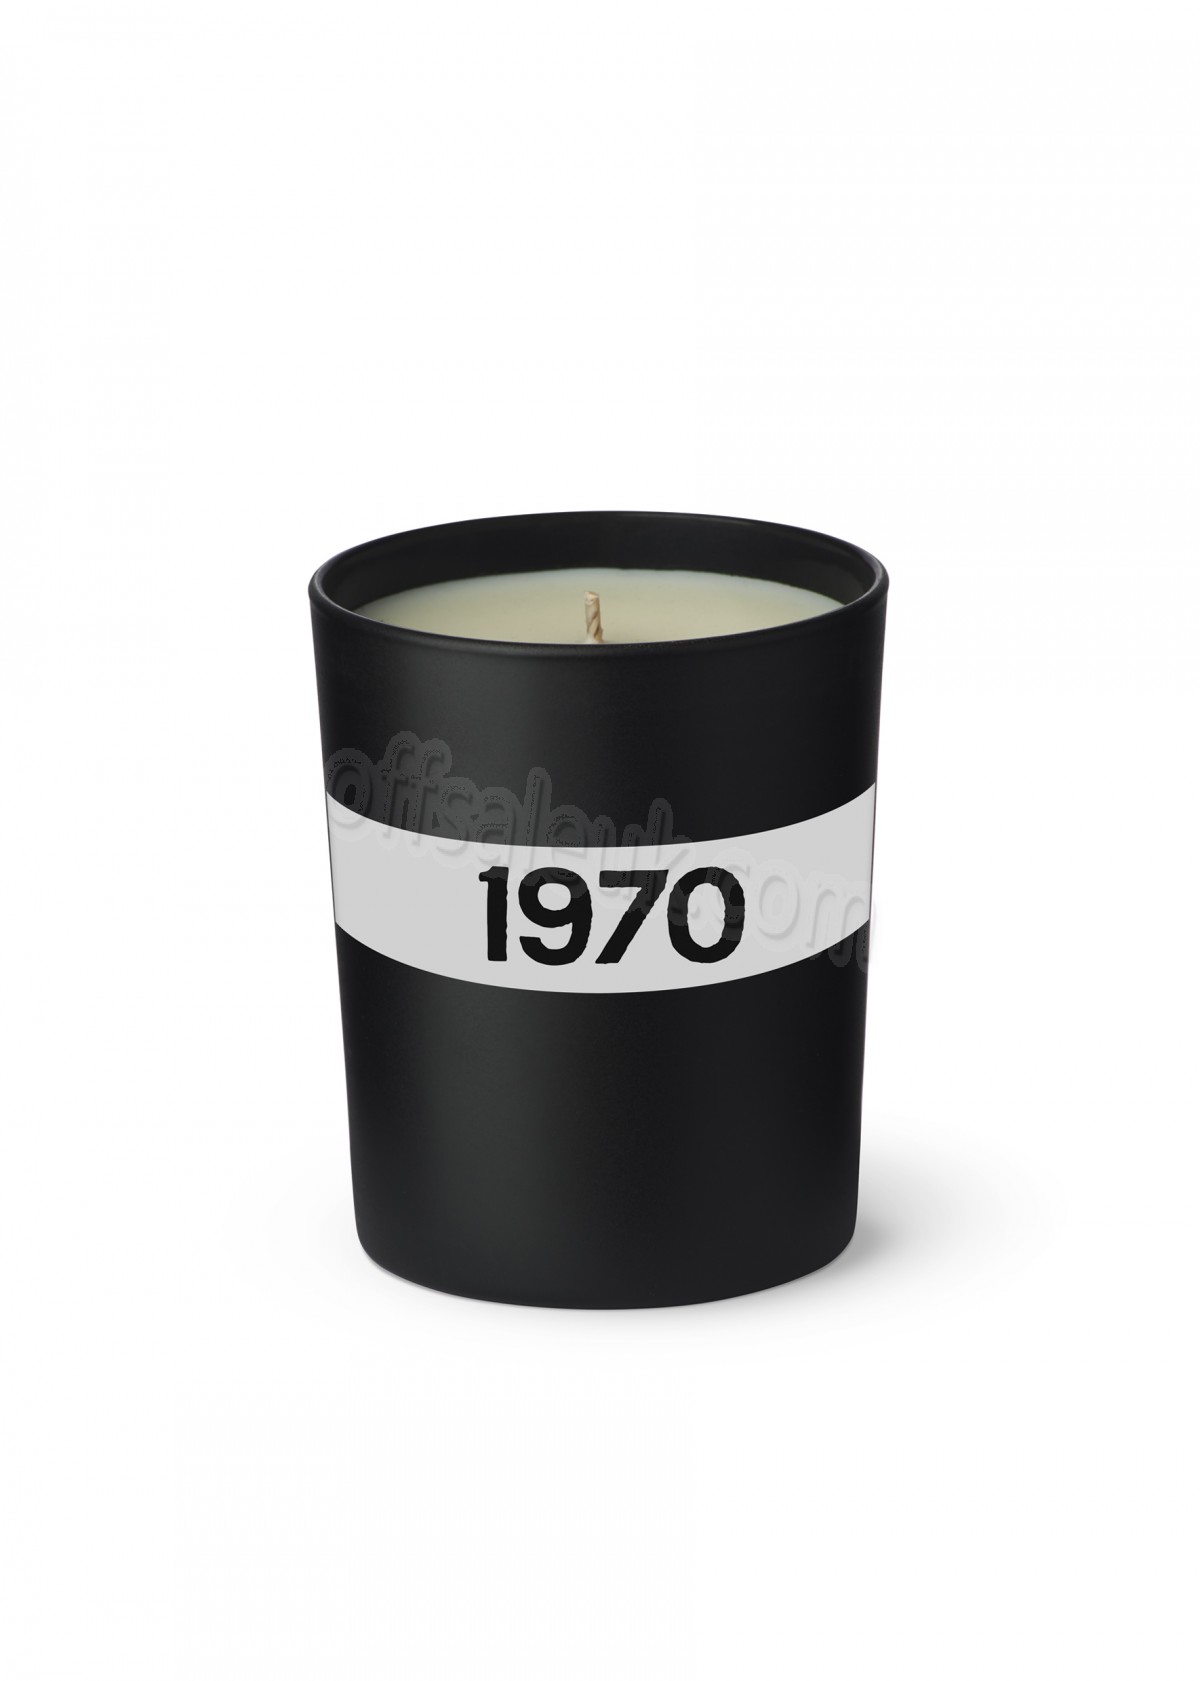 Cheap 1970 Candle - -0